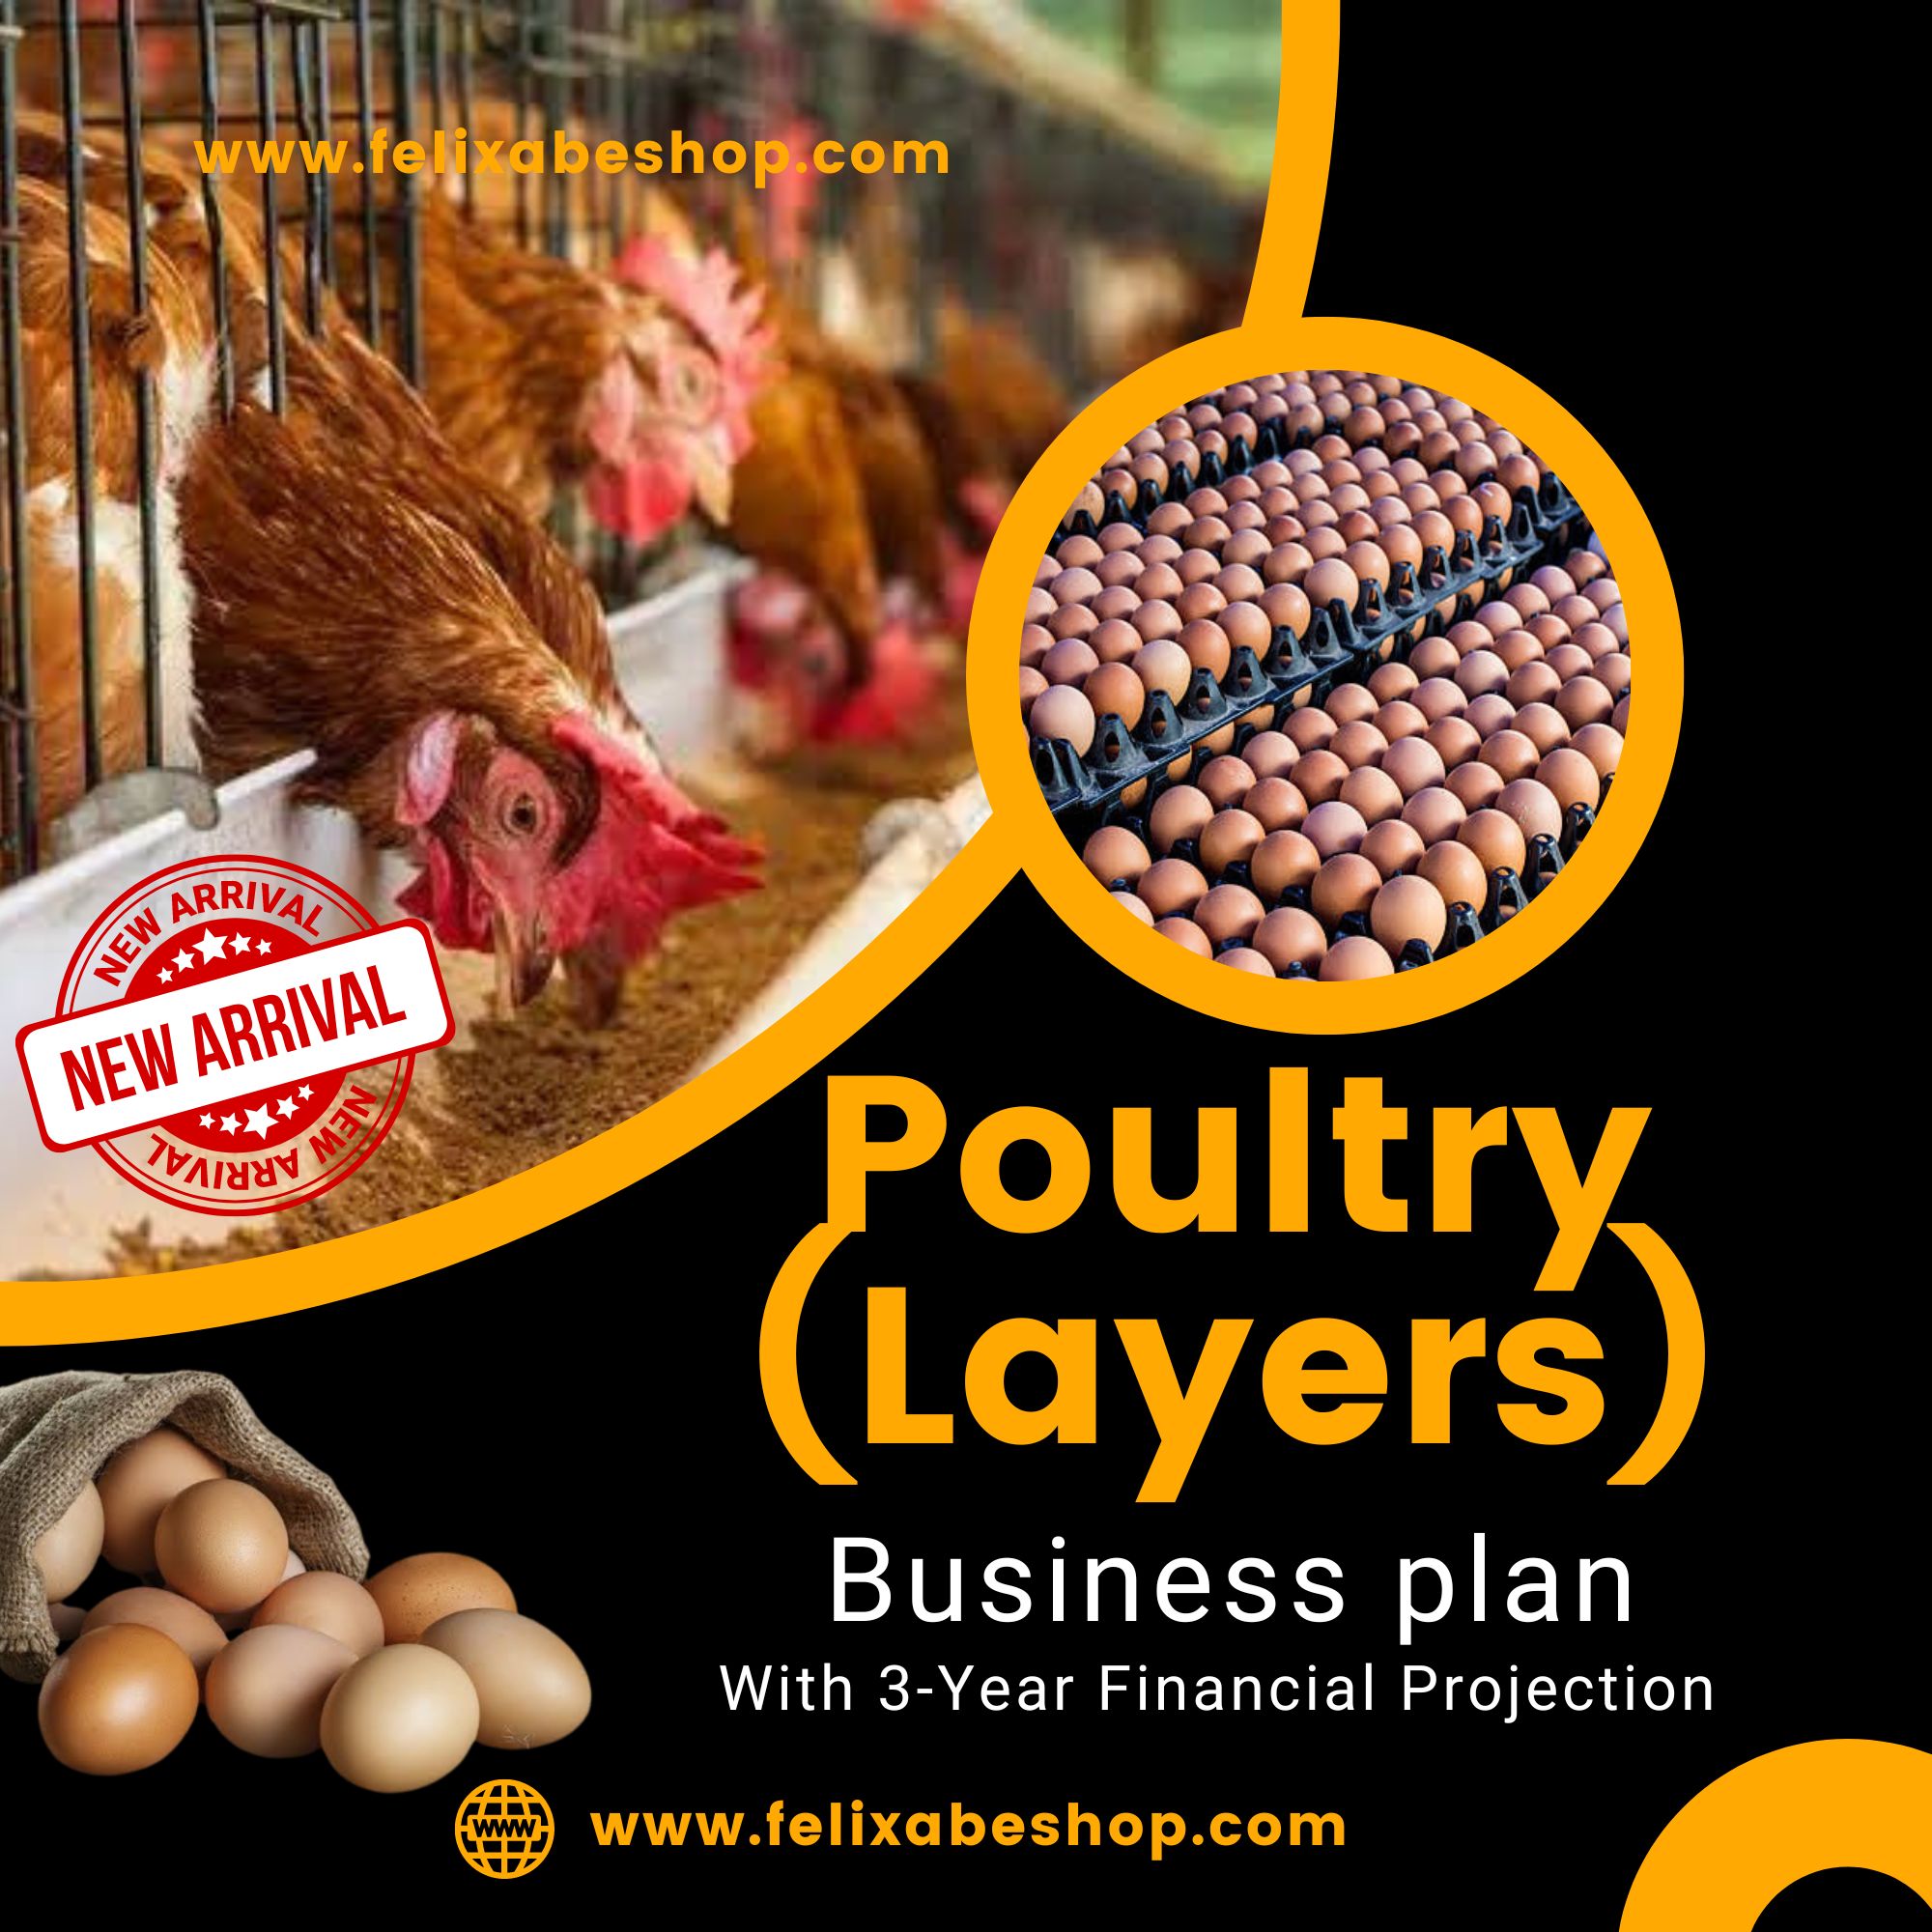 a good business plan on poultry farming